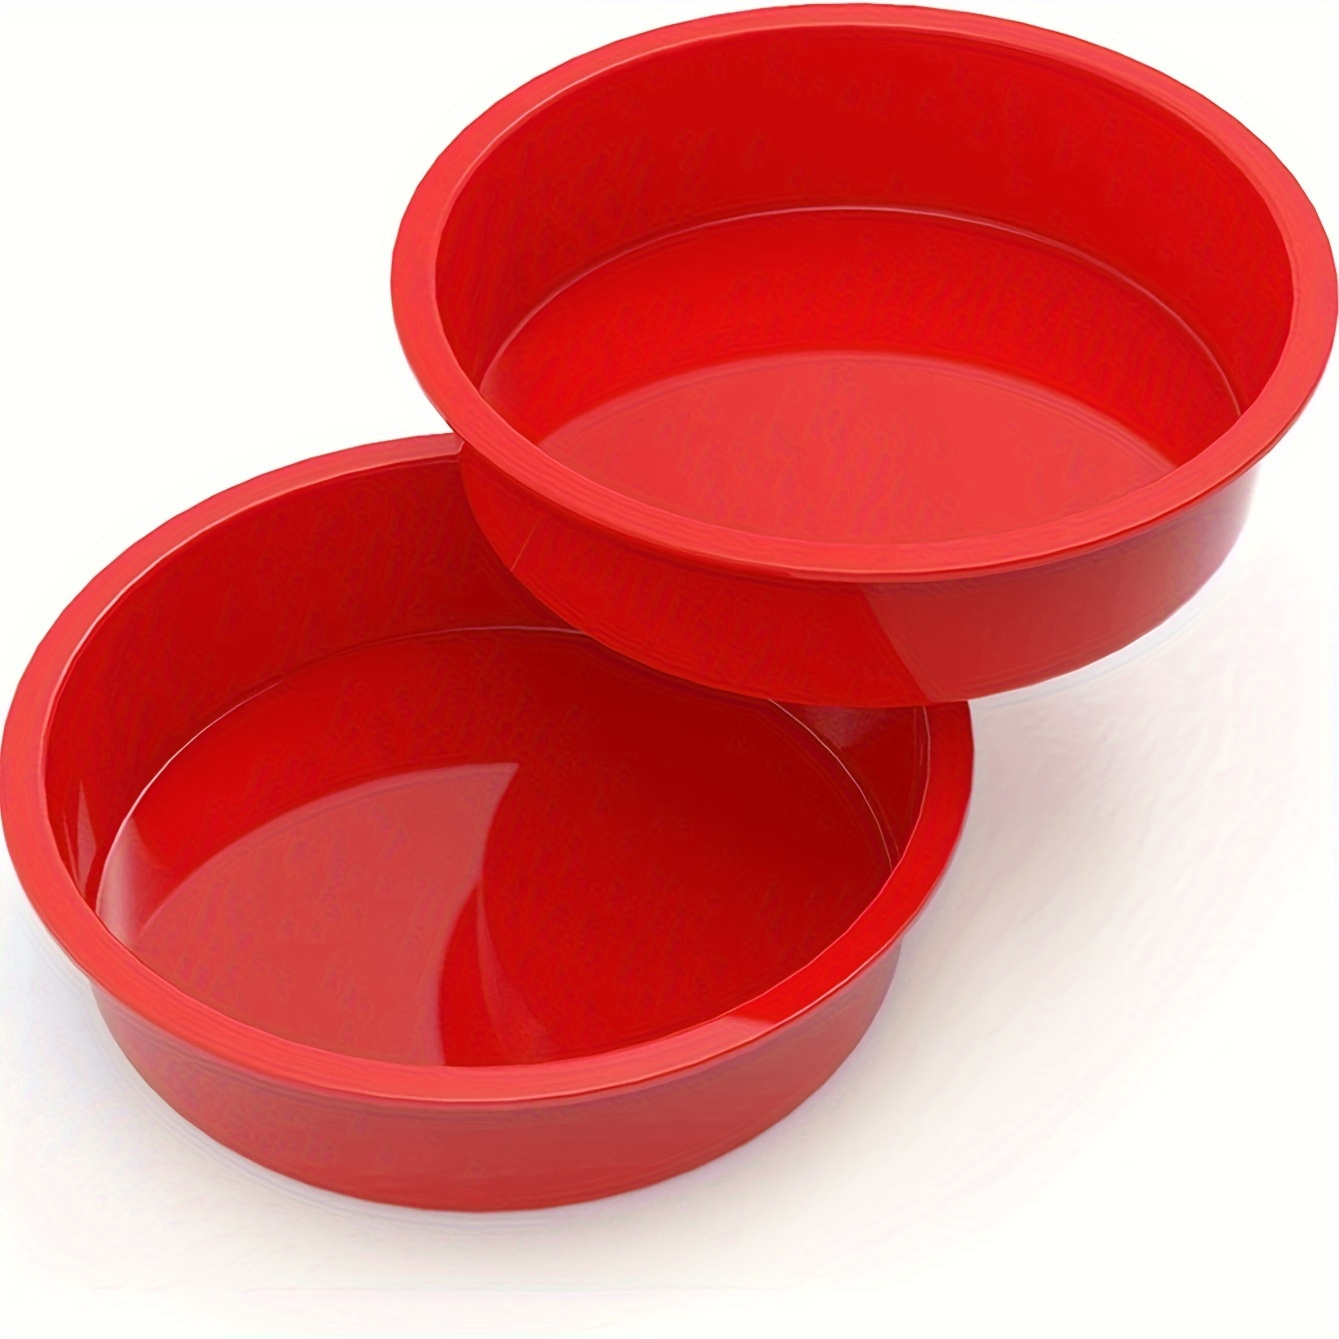 

2pcs, Silicone Round Shaped Cake Pans - 8 Inch Nonstick Round Cake Mold, Round Shaped Baking Pans For Cakes And Brownies